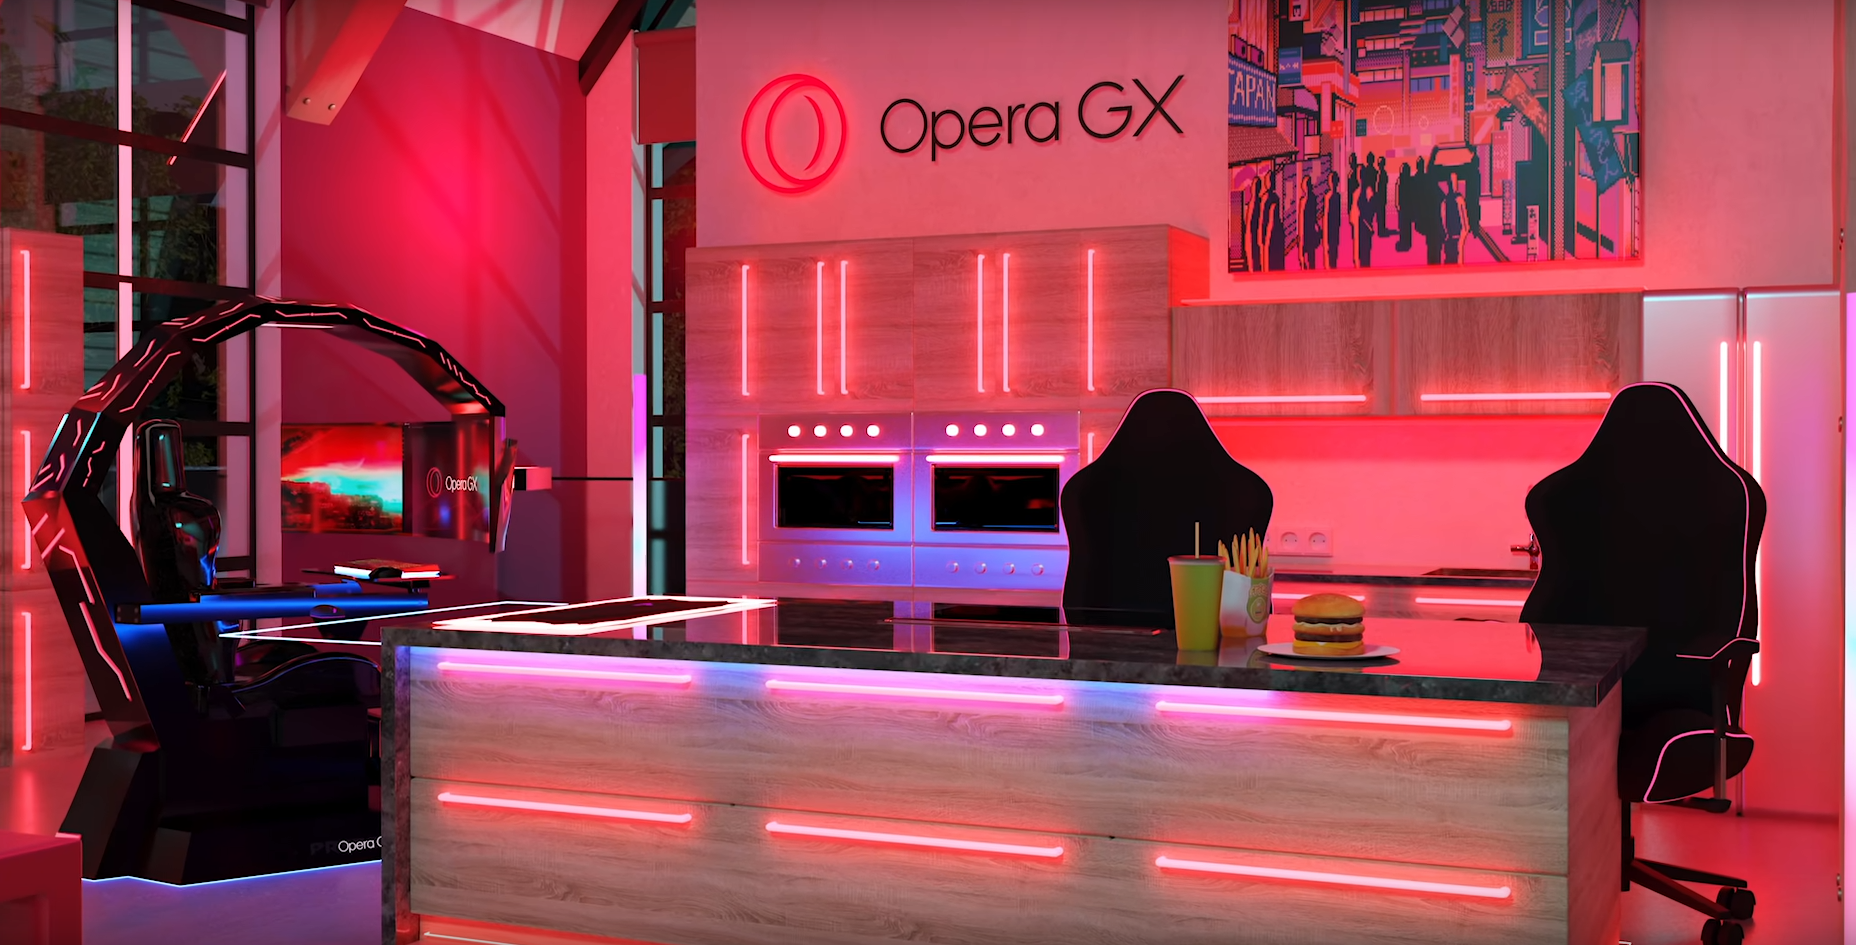 Opera GX browser teases real estate concept for exclusive gaming village  and prototype home in Andorra - Opera Newsroom